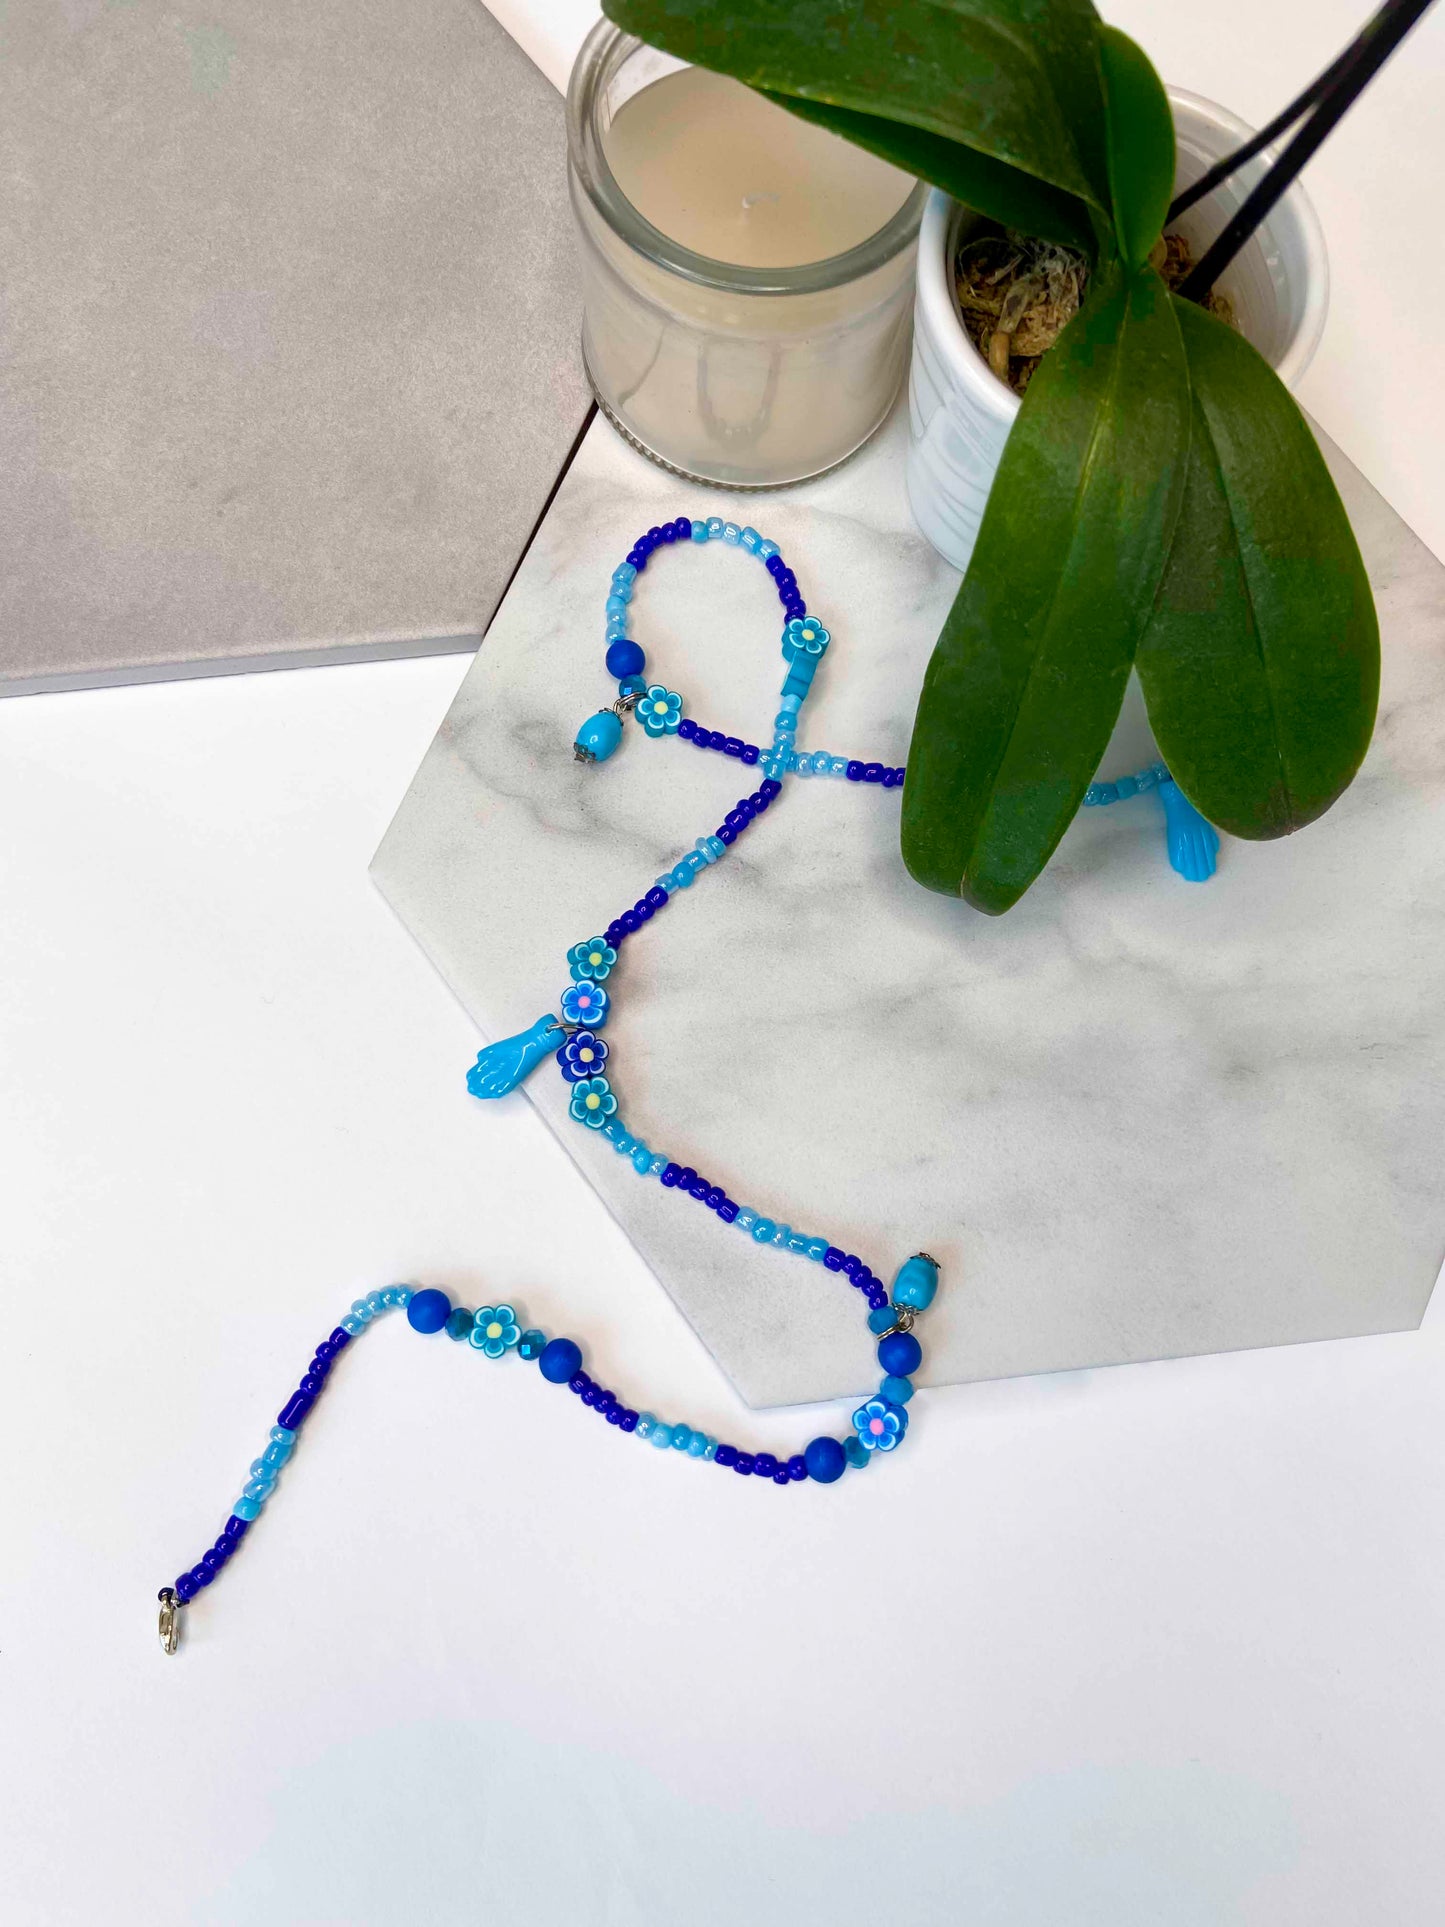 Handmade blue beaded belly chain made using light and dark blue beads, flower charms, turquoise stones, and hand charms.  